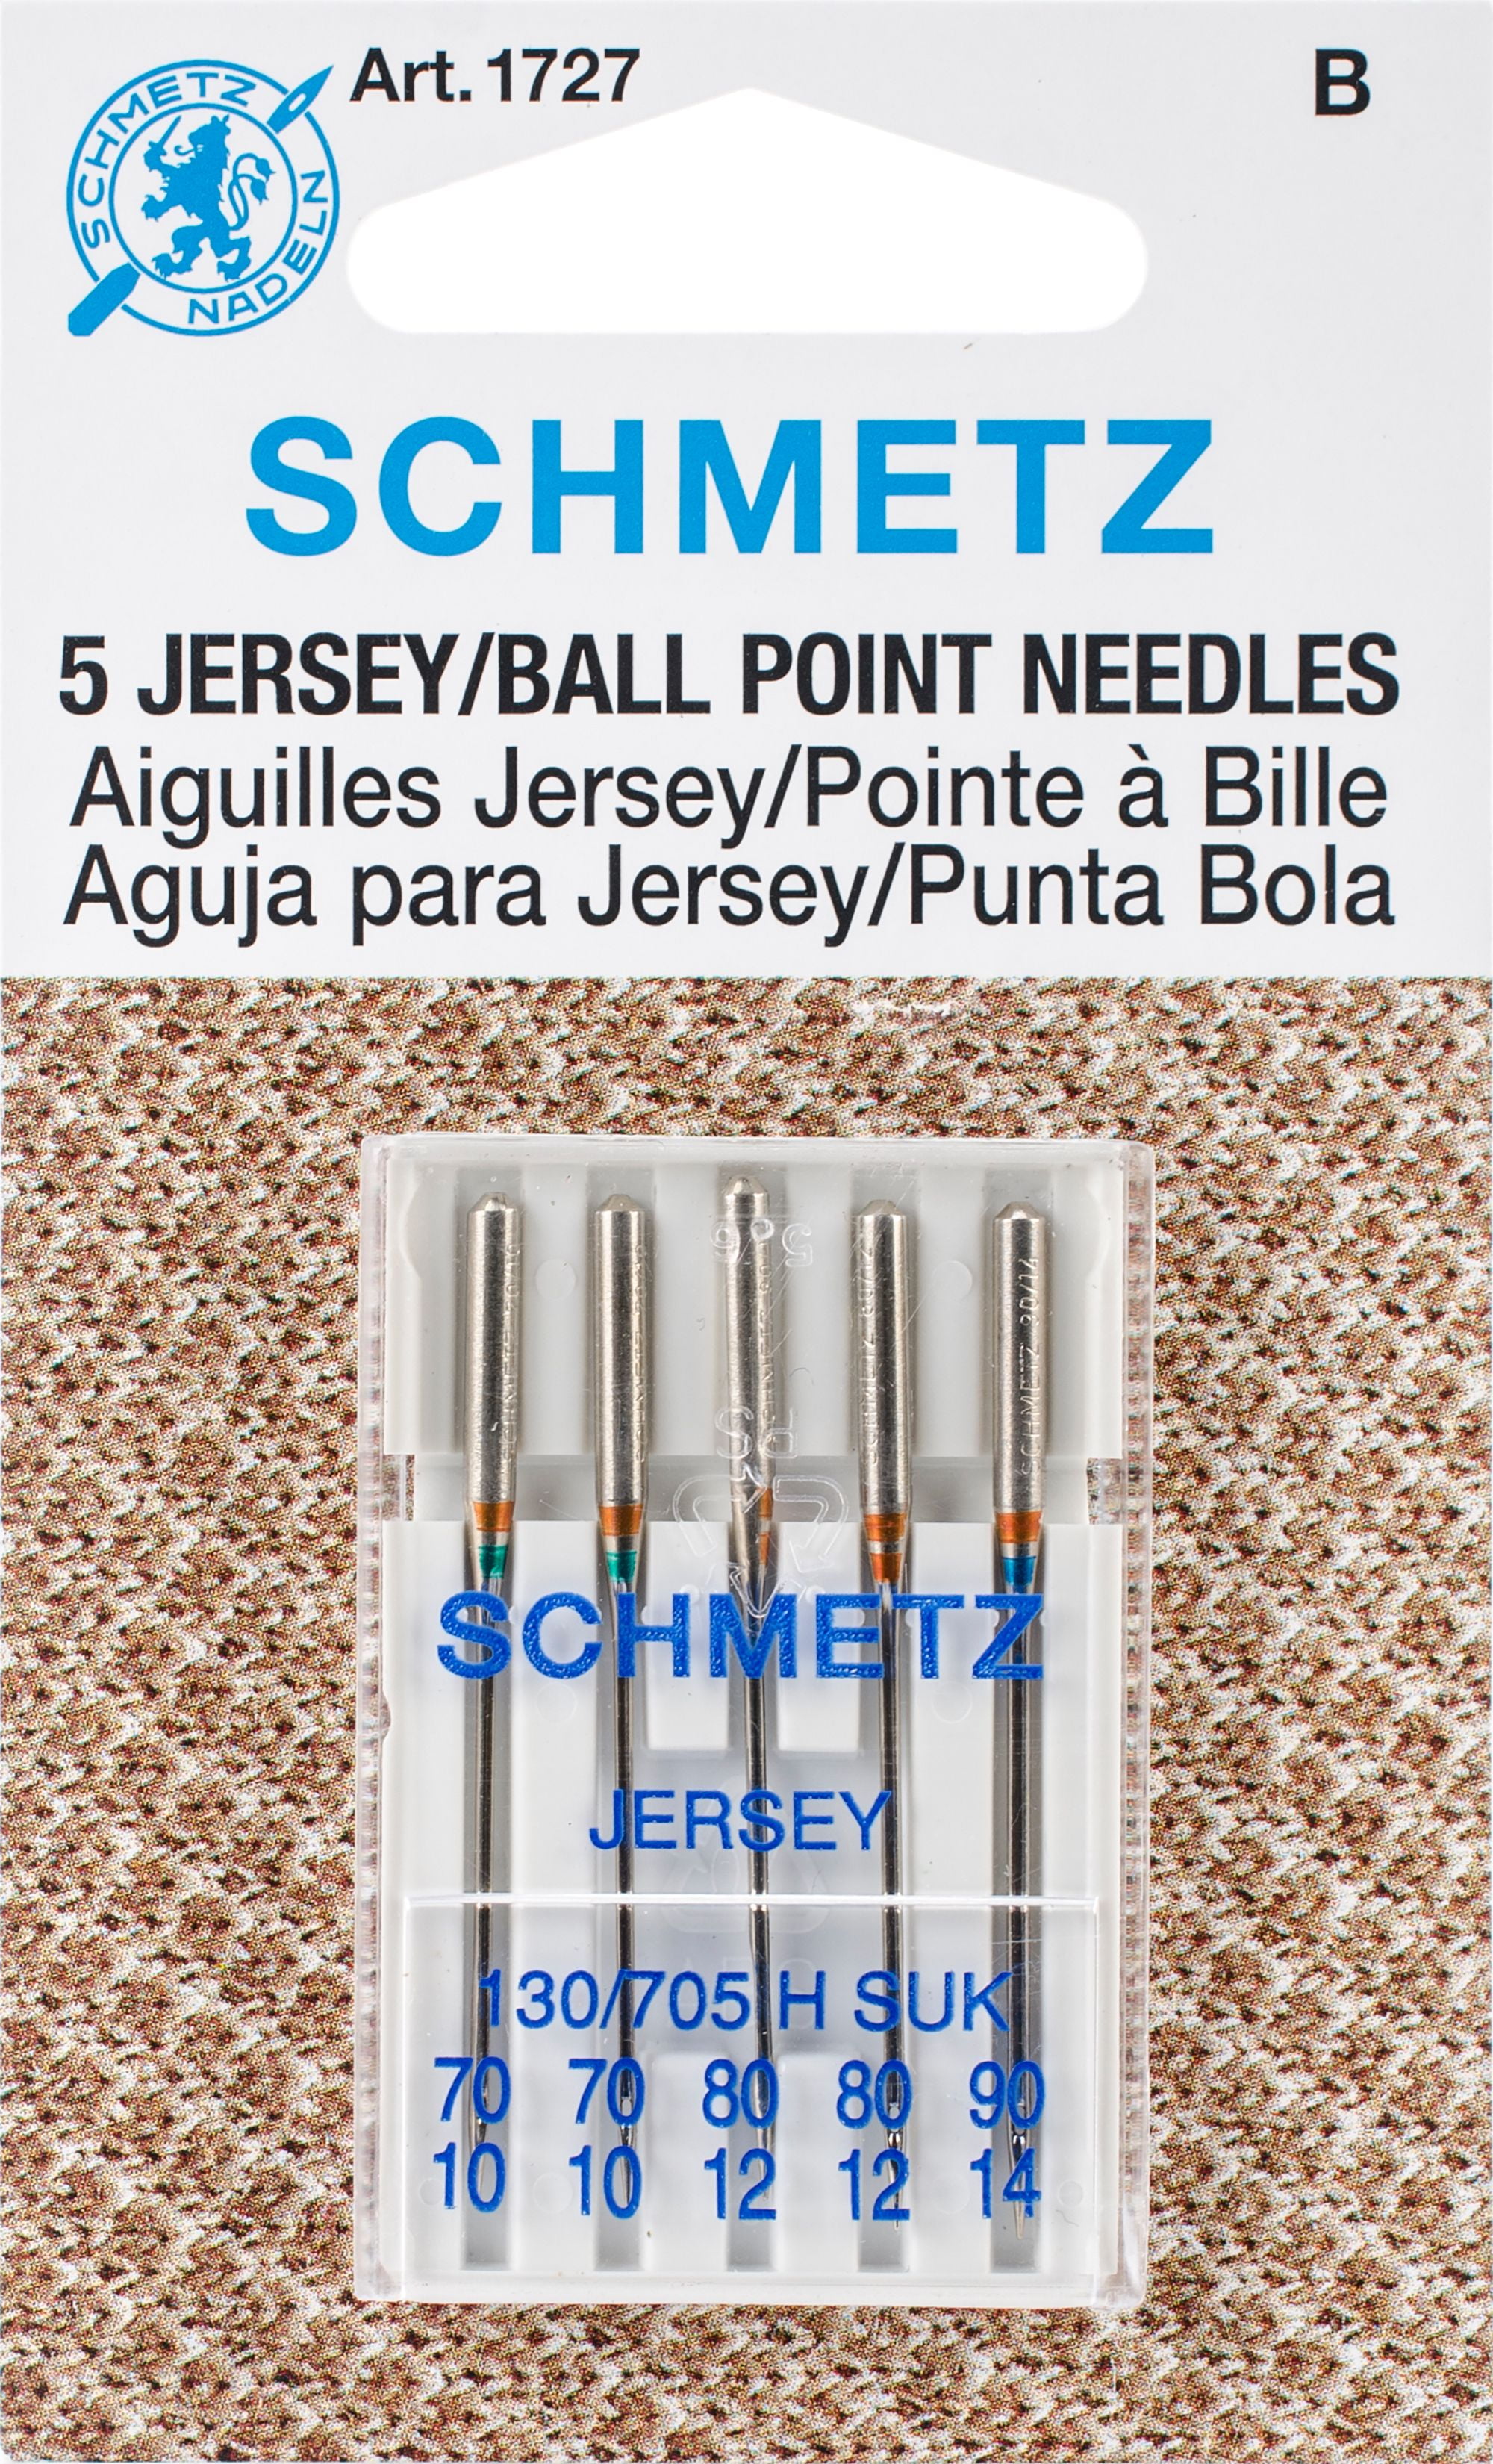 NEEDLES BALL POINT JERSEY 130/705 HB Home Sewing Machine Sizes 10,12,14,16 